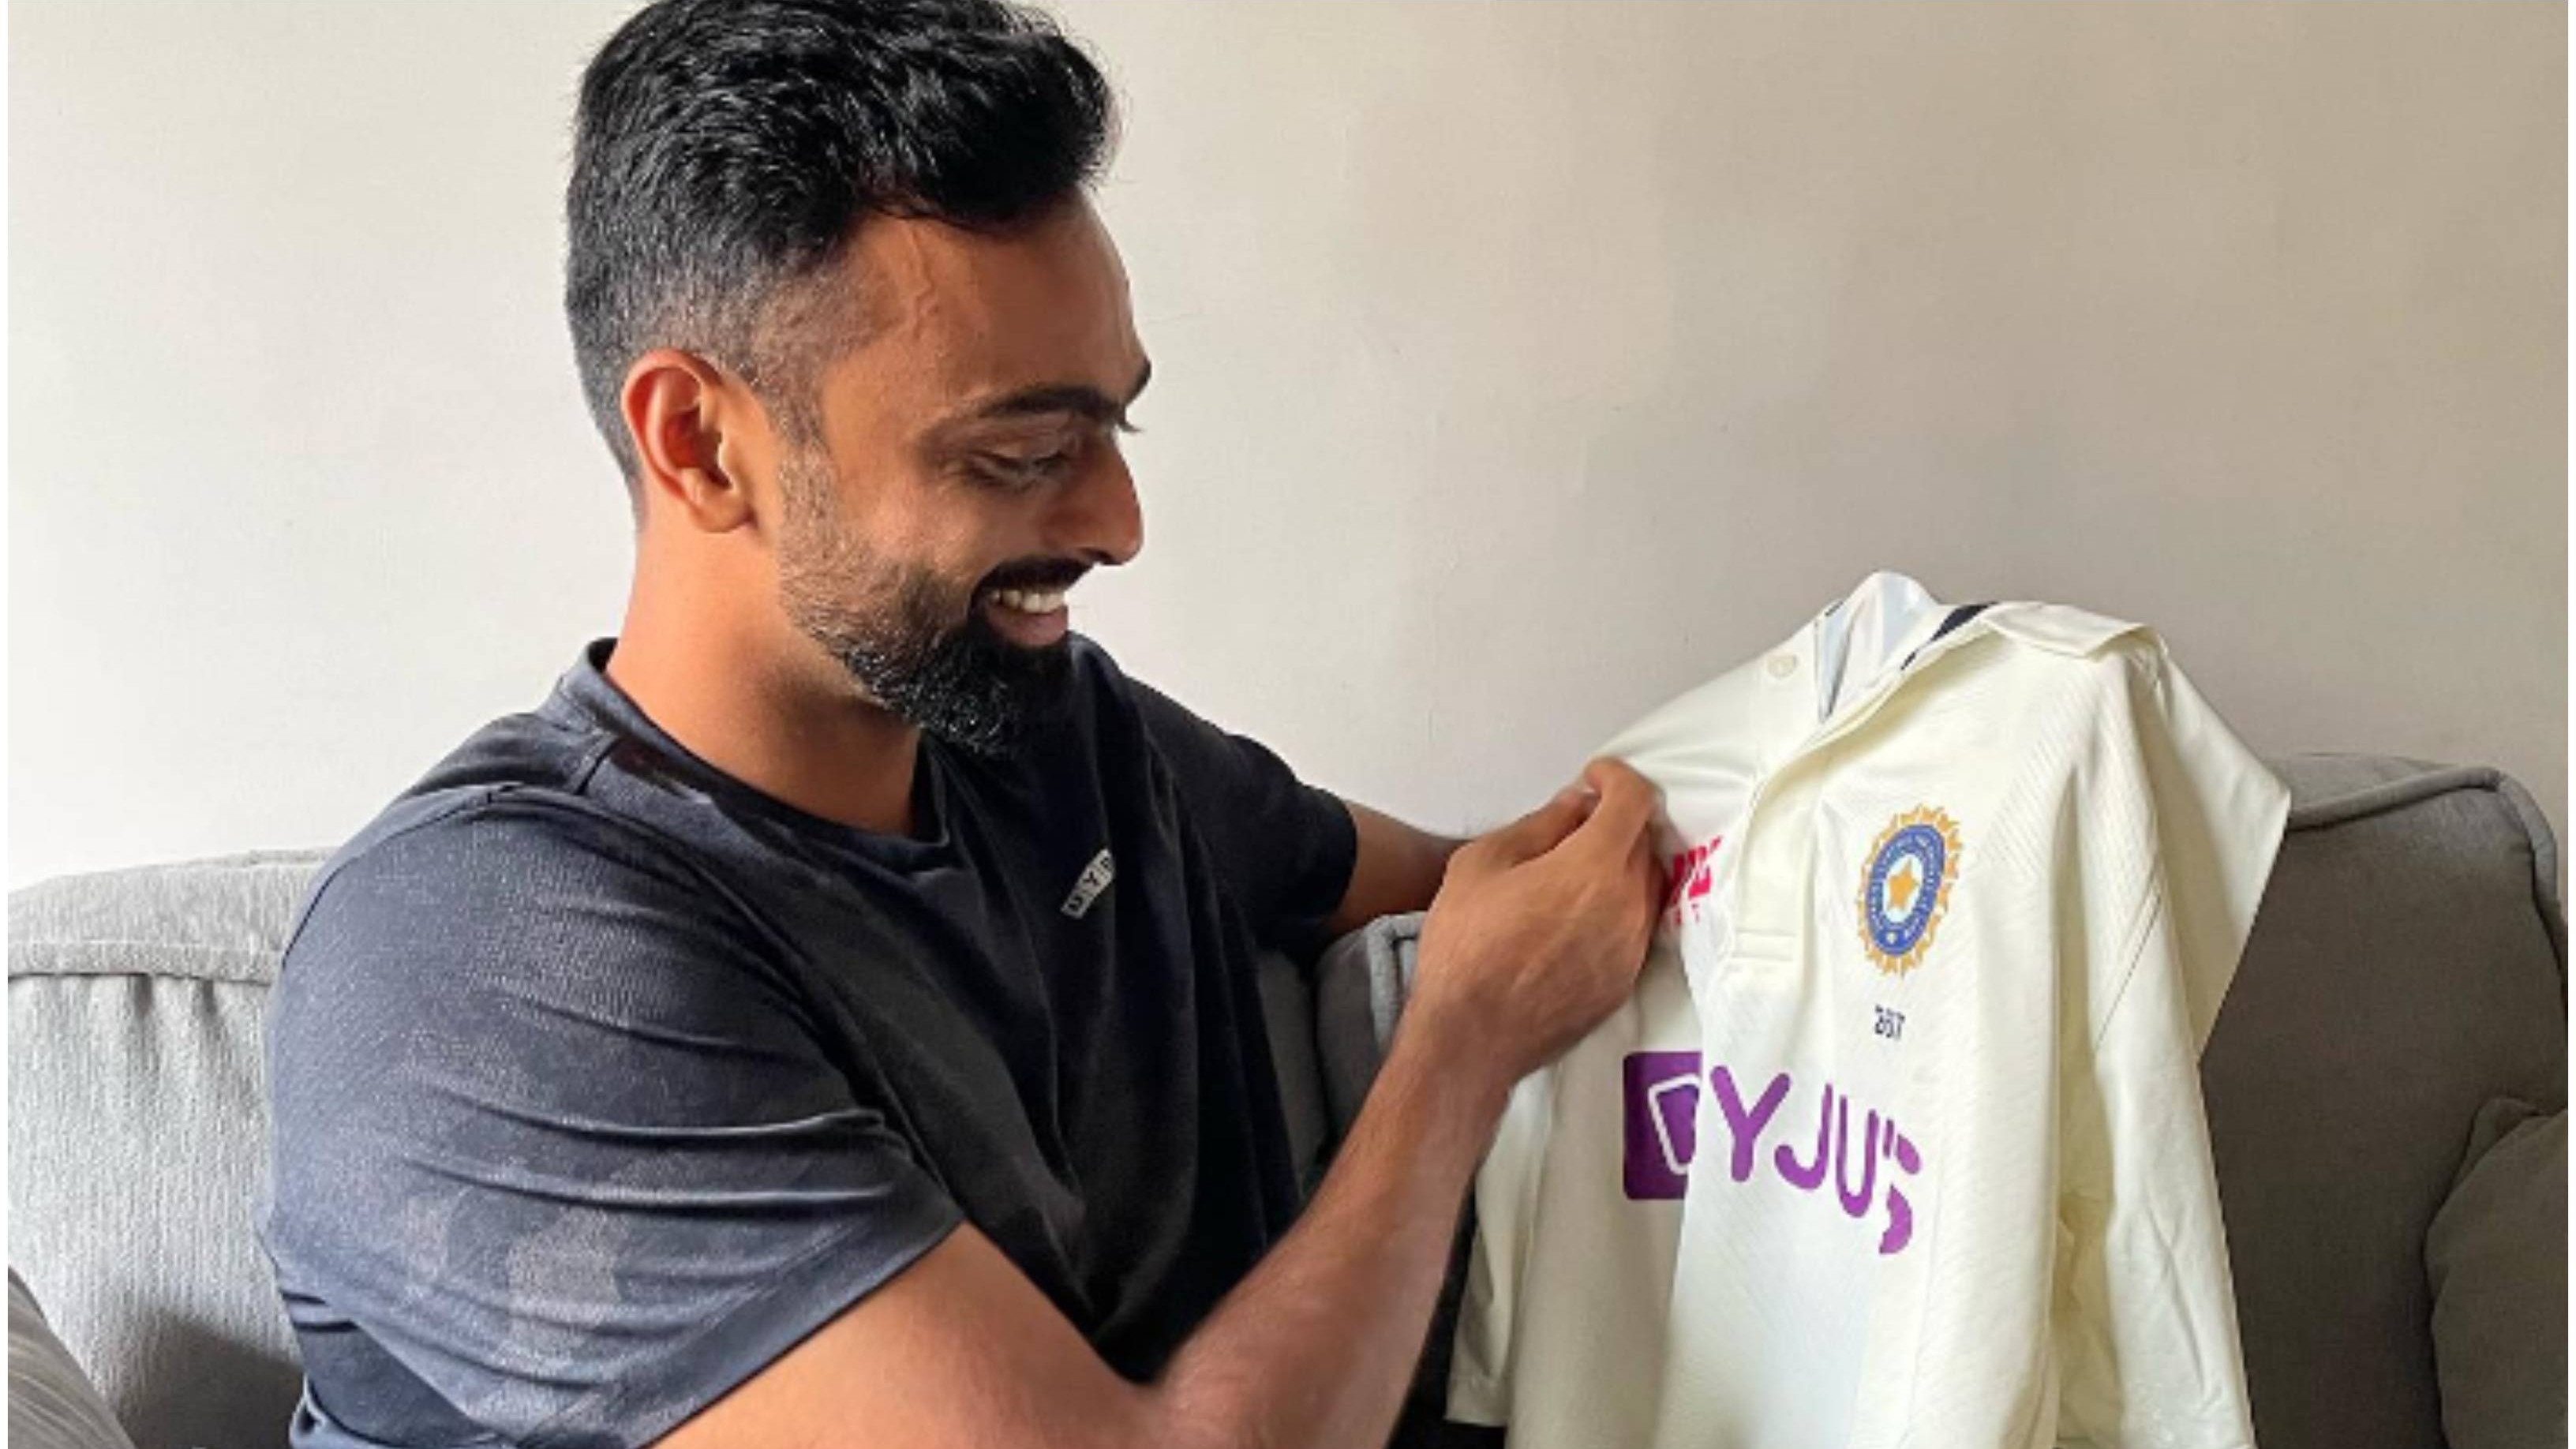 BAN v IND 2022: Still stuck in India, Jaydev Unadkat unlikely to feature in Chattogram Test - Report